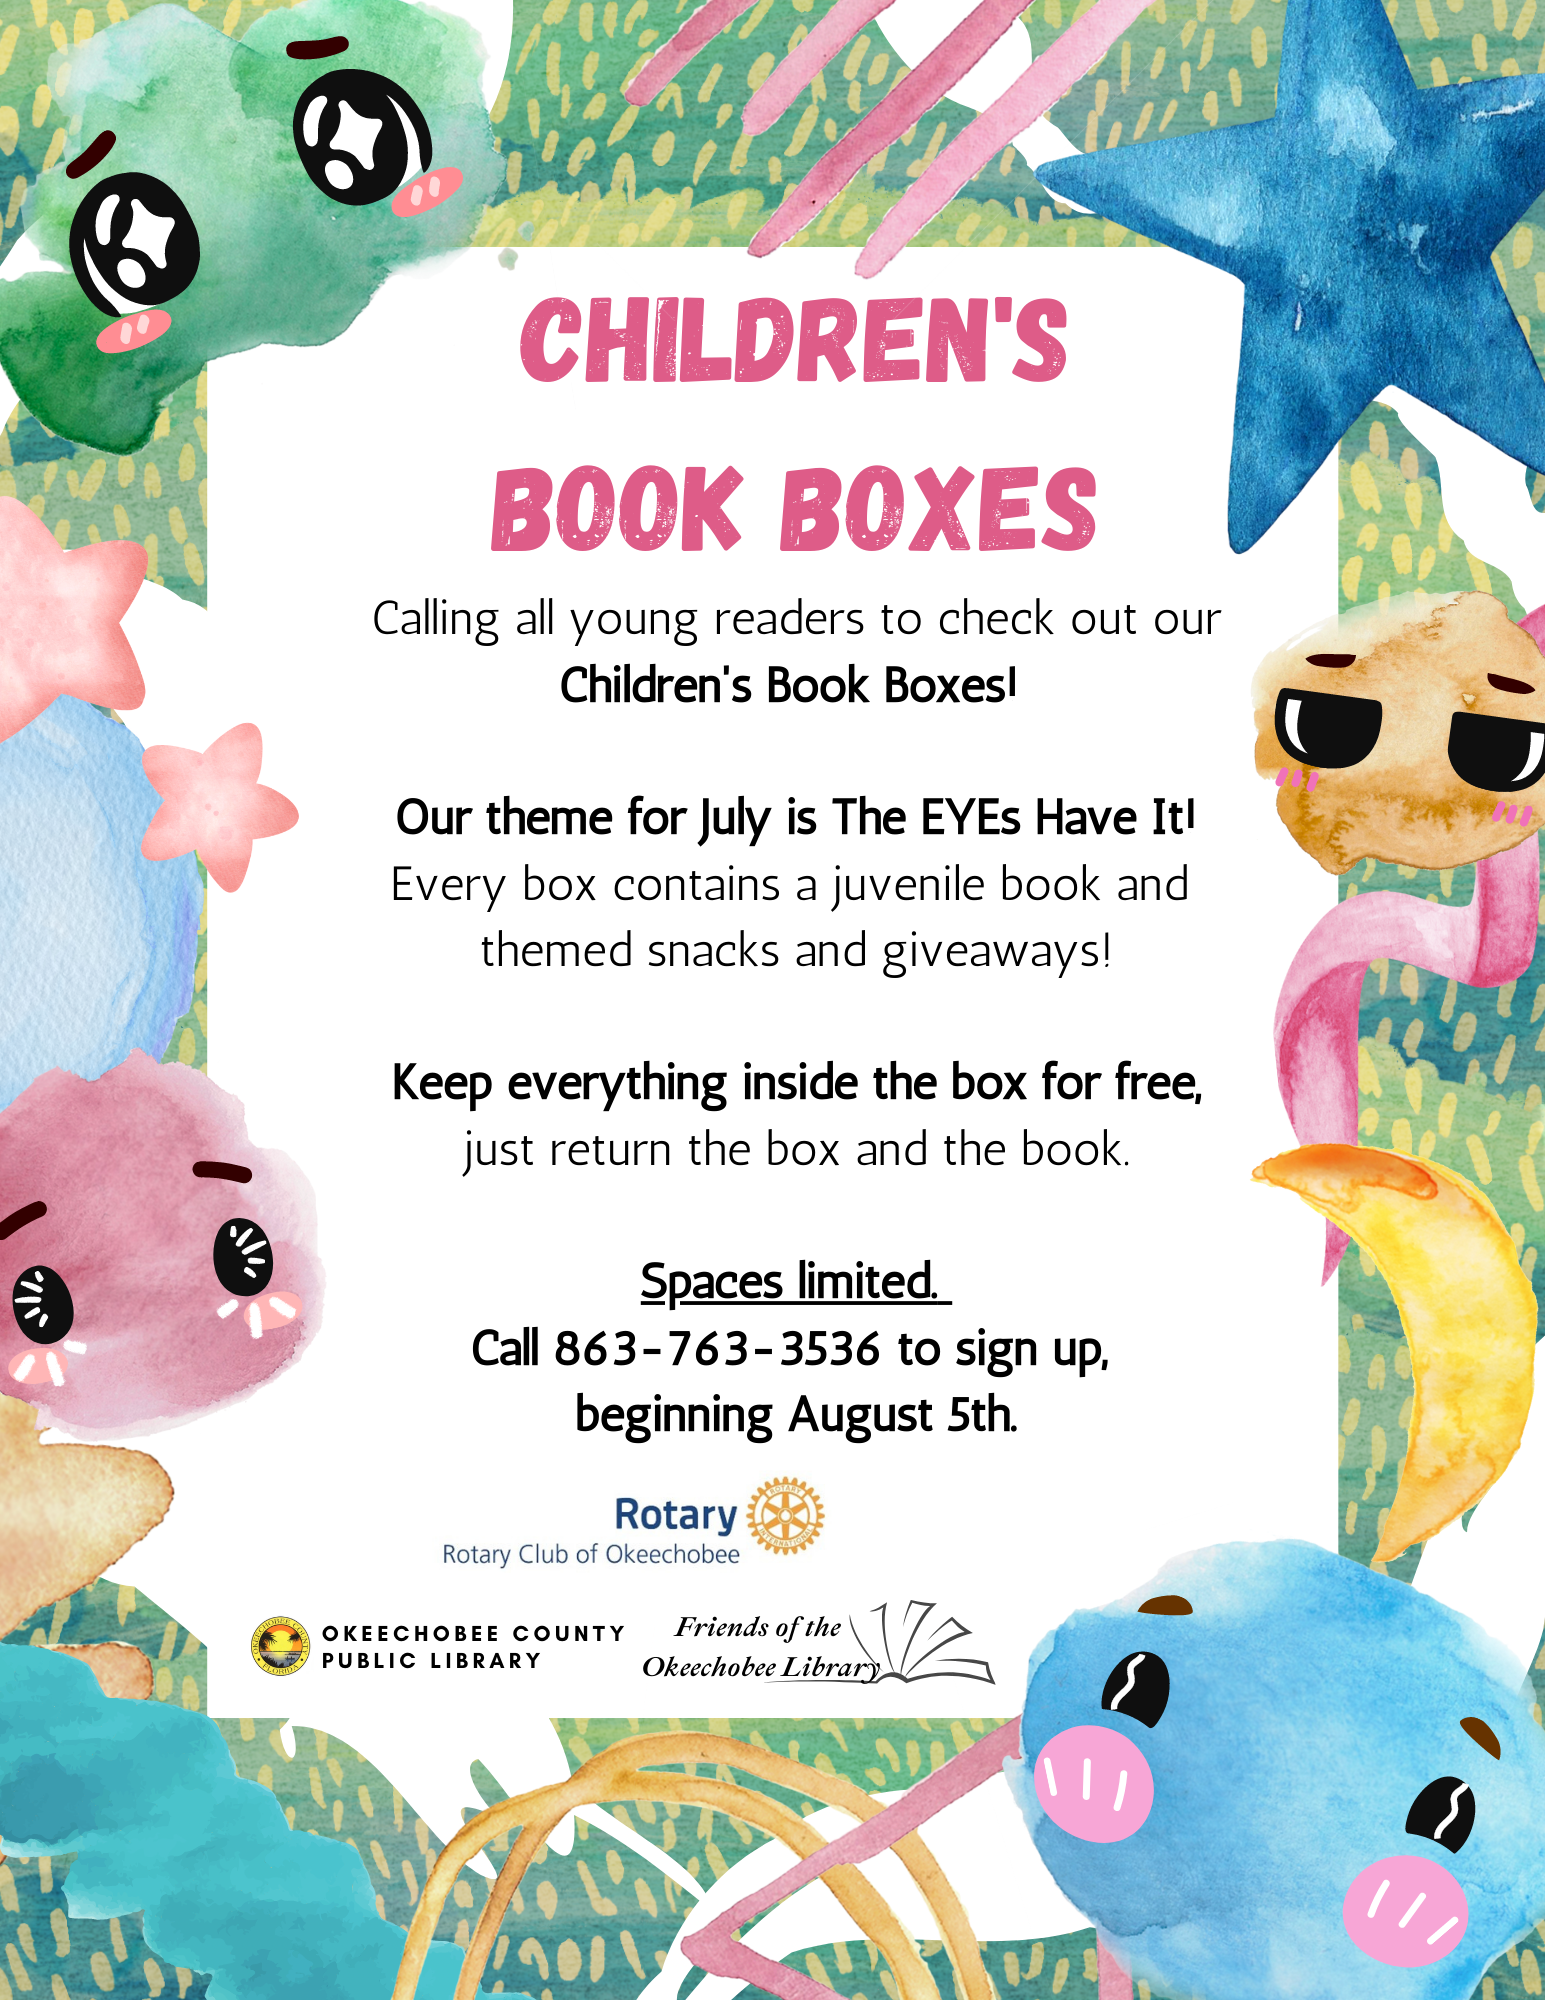 Every box contains a juvenile book and themed snacks and giveaways!